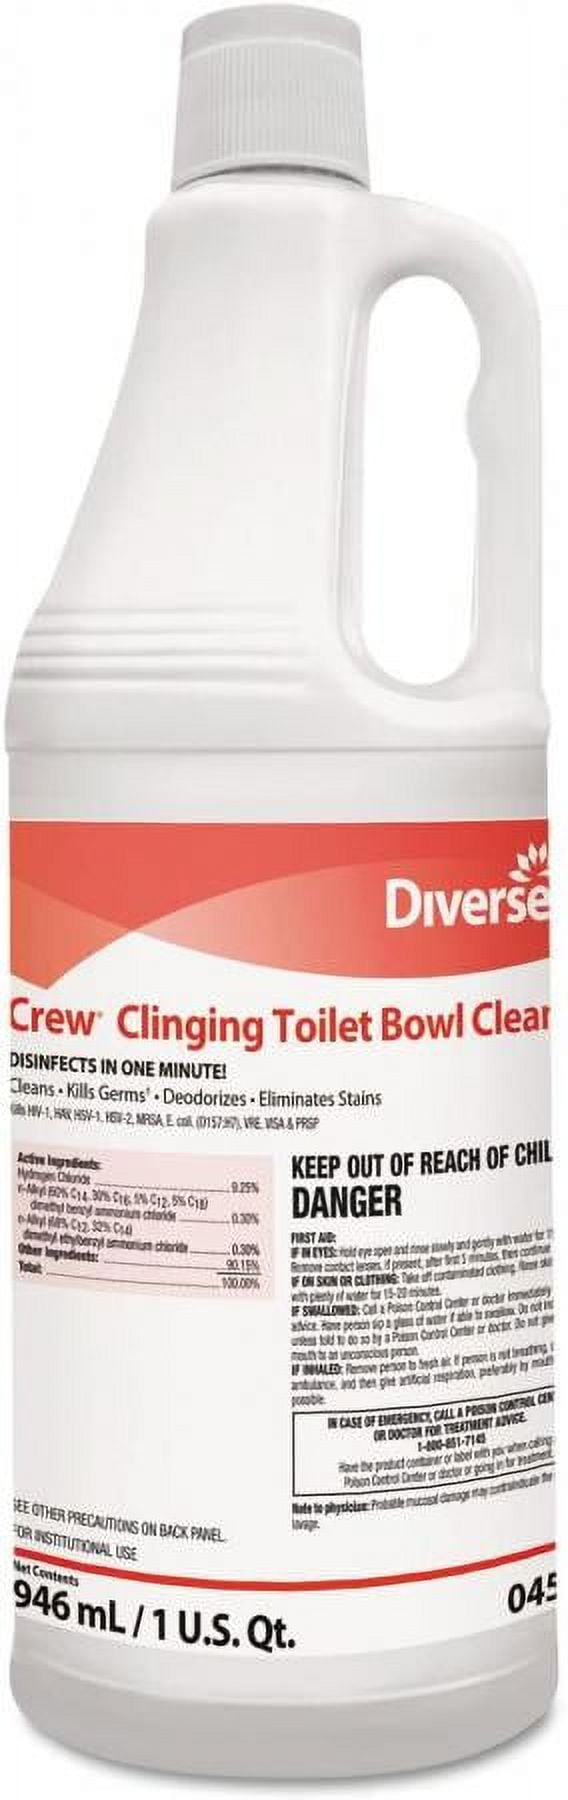 Diversey Crew Clinging Toilet Bowl Cleaner, Acid-based, 32 ounce Bottle,  Floral Scent, 12 Count 